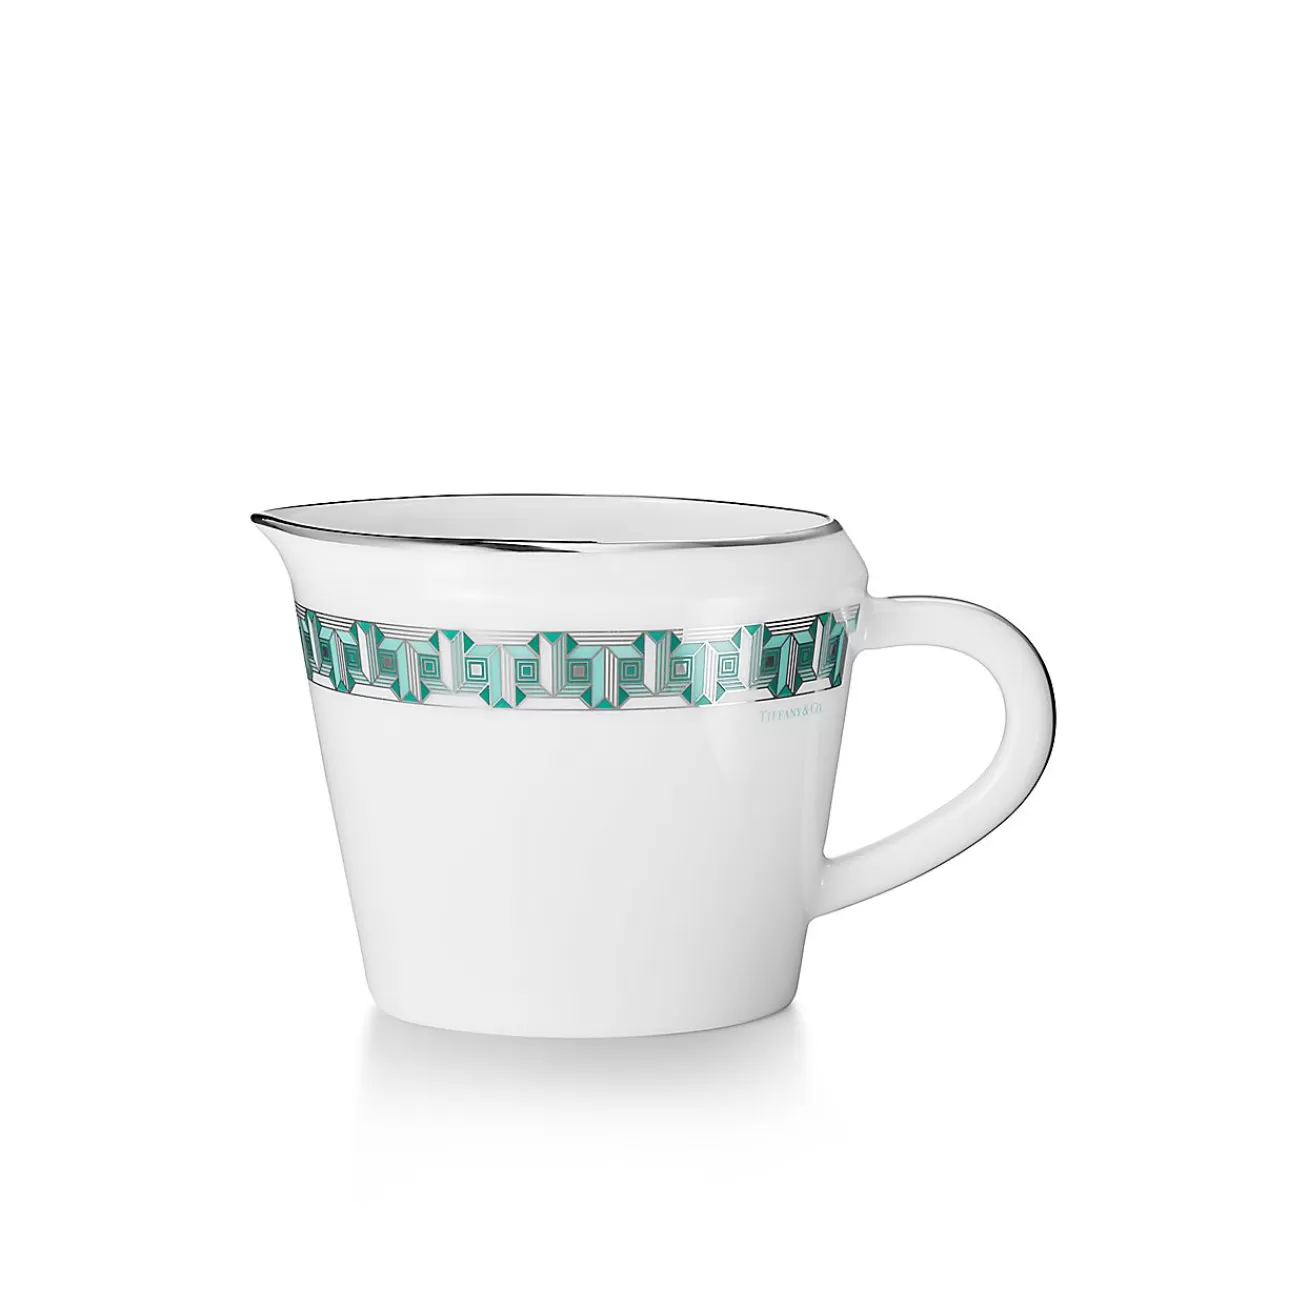 Tiffany & Co. Tiffany Blue Tiffany T True Creamer with a Hand-painted Platinum Rim | ^ The Home | Housewarming Gifts